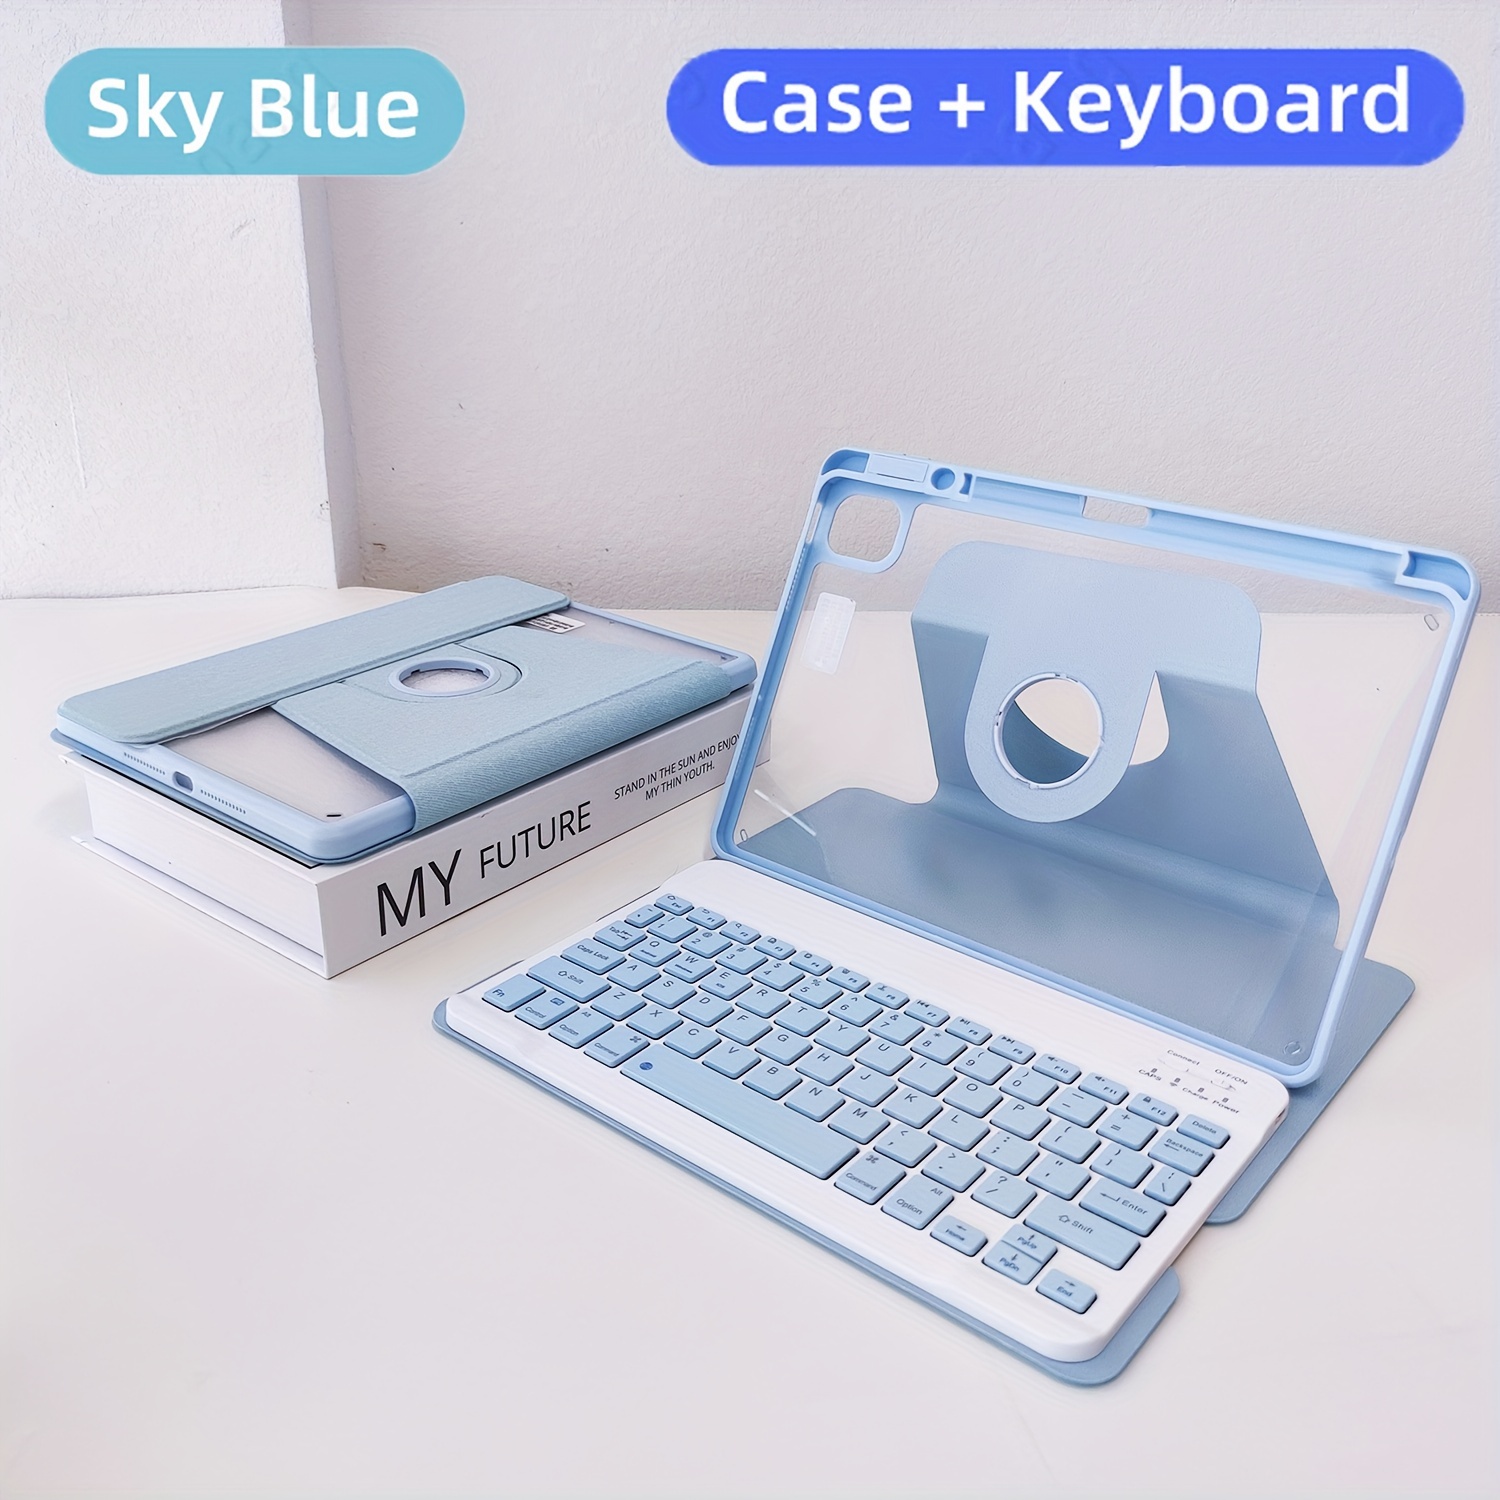 Factory Reset Magic Keyboardxiaomi Pad 6 Pro Smart Keyboard Case - Tpu  Solid Cover With Multi-language Support